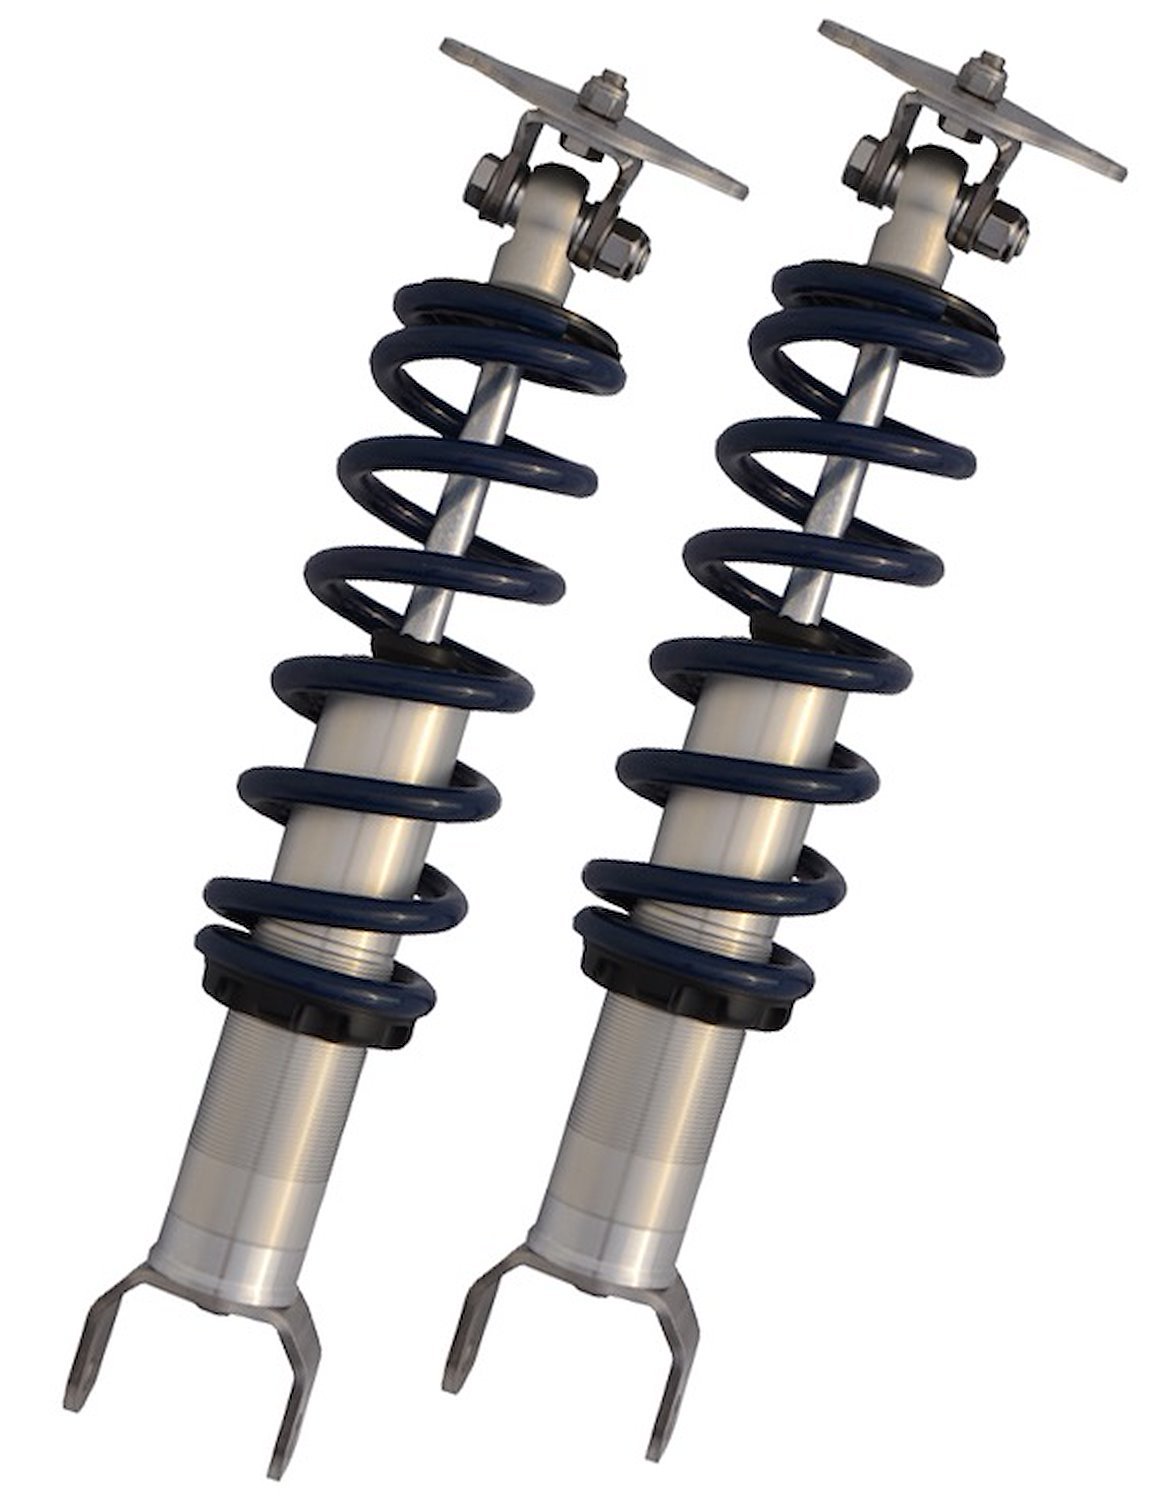 HQ Series rear CoilOvers for 97-13 Corvette. Sold as pair.